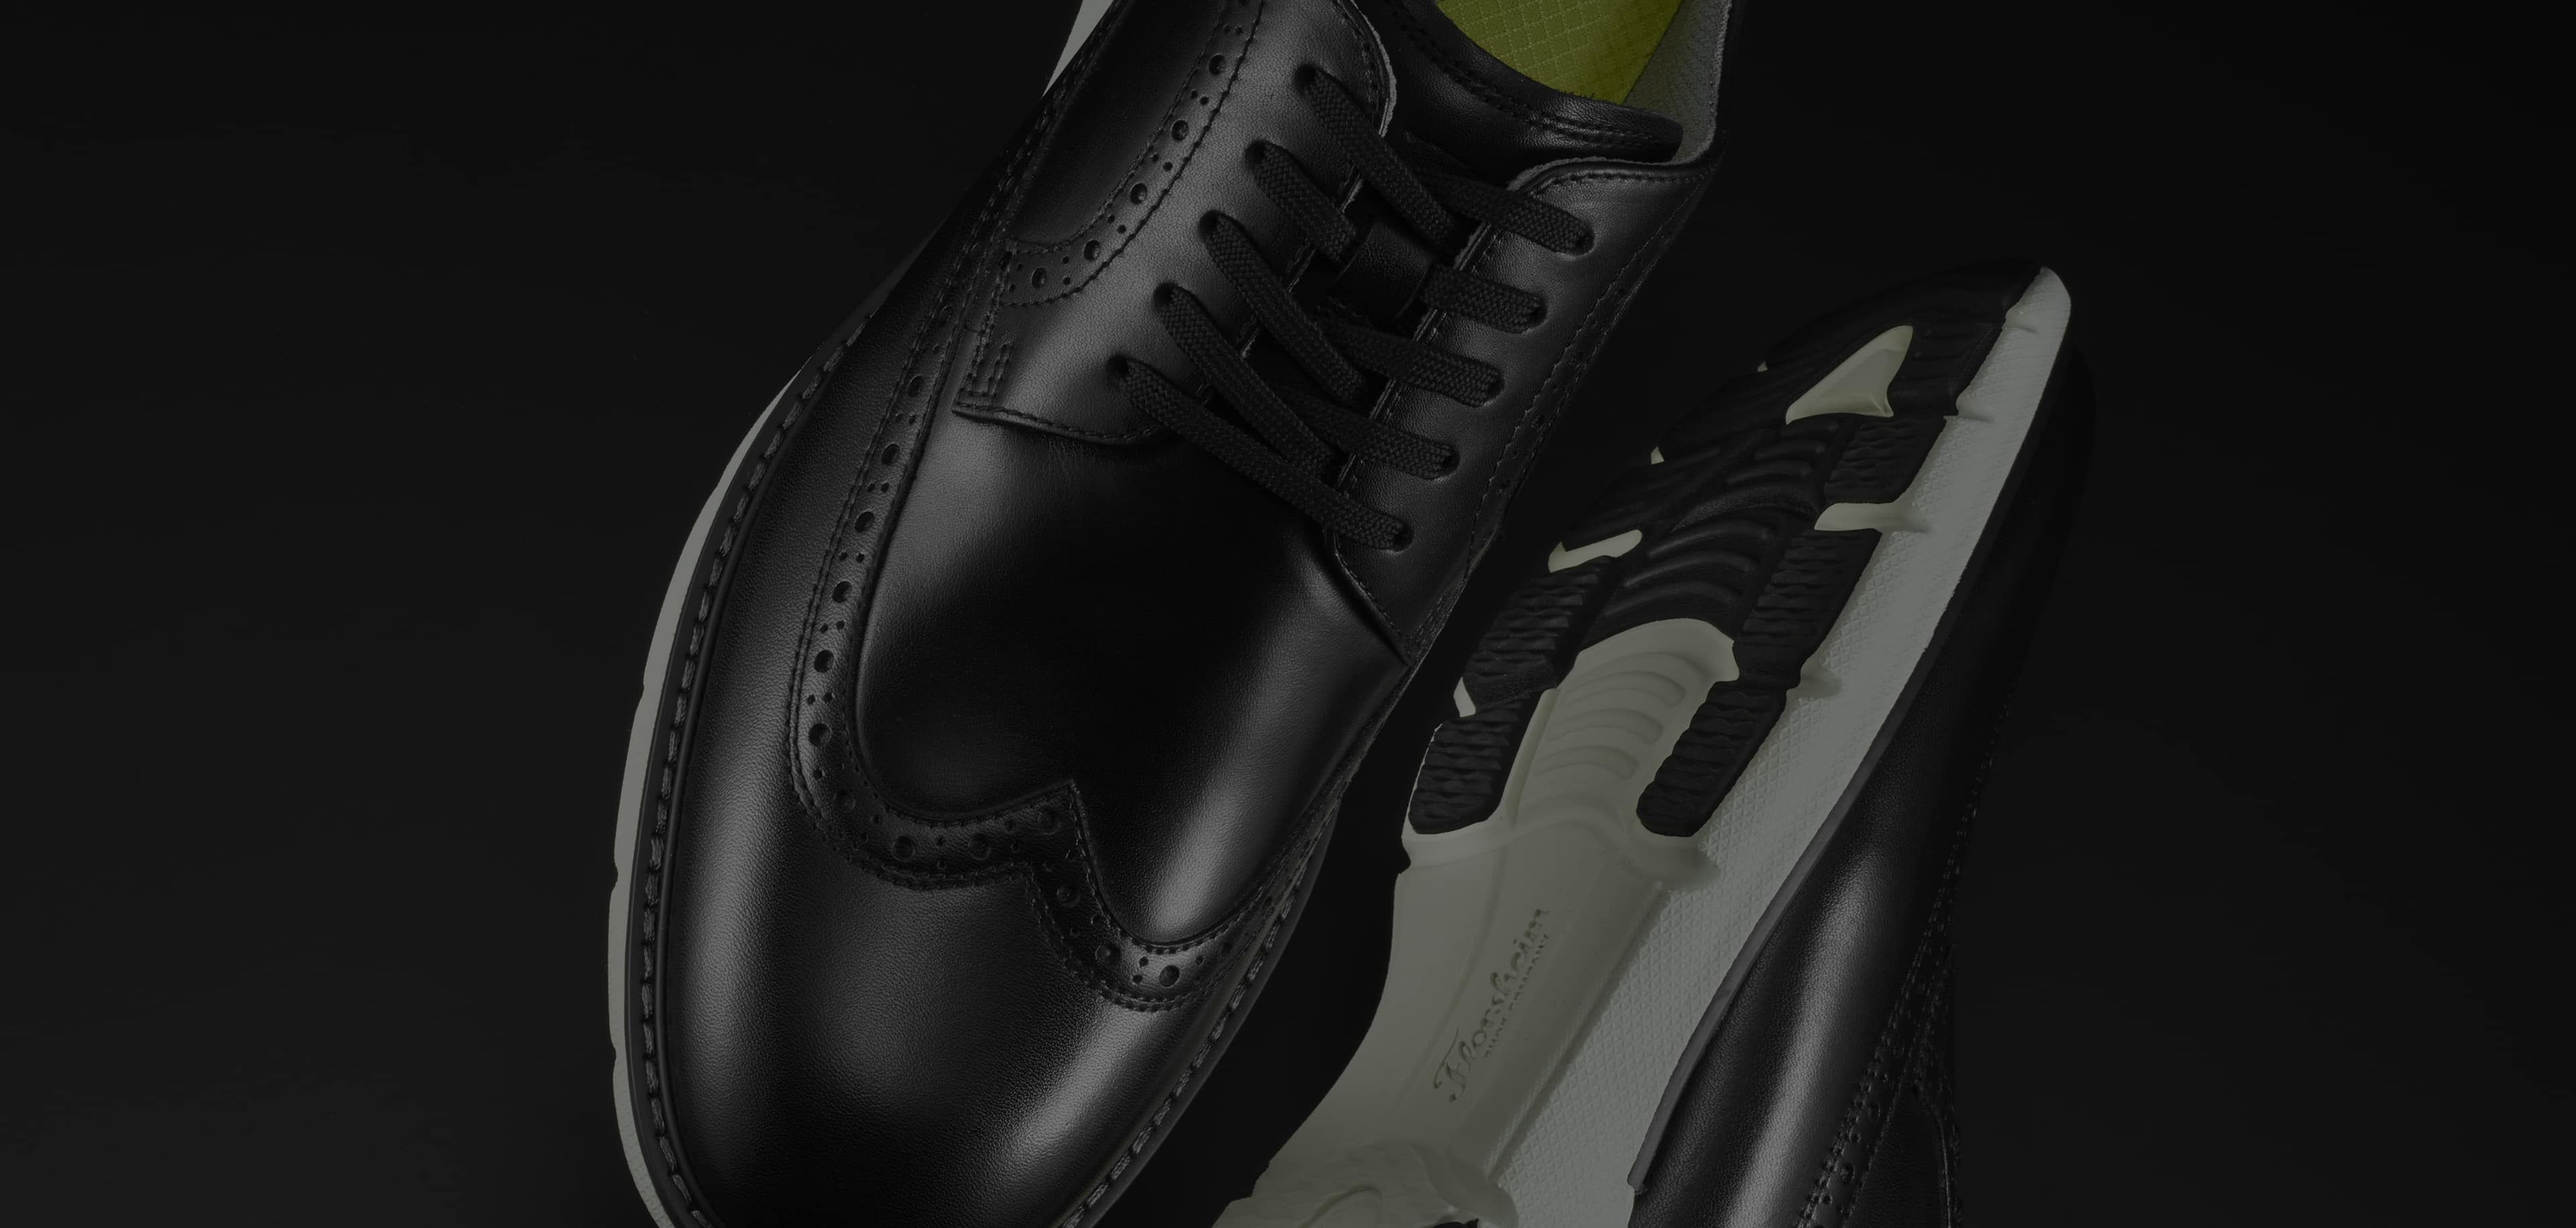 Click to shop our Black Friday Sale - 25% off sitewide! Offer ends 11/26/22. Image features the Frenzi Wingtip Oxford in black.